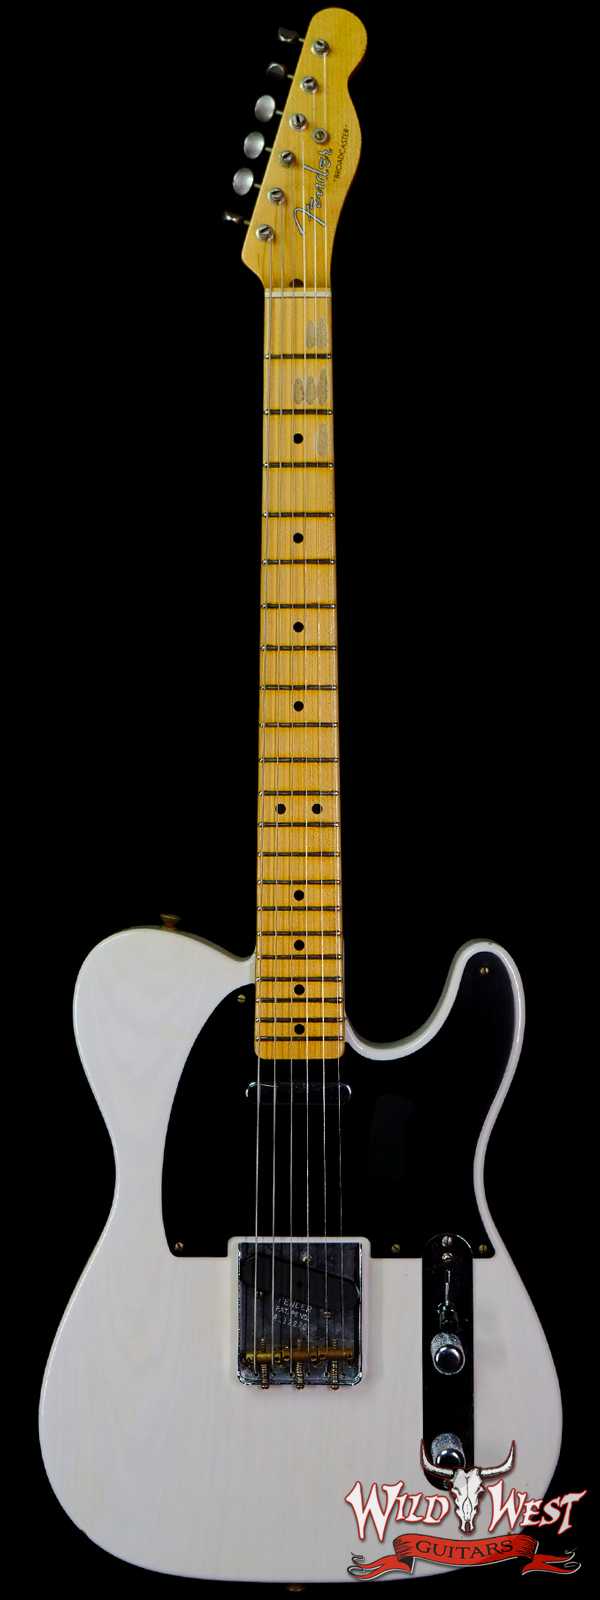 Fender Custom Shop 1952 Telecaster with Hand-Wound Pickups Journeyman Relic White Blonde